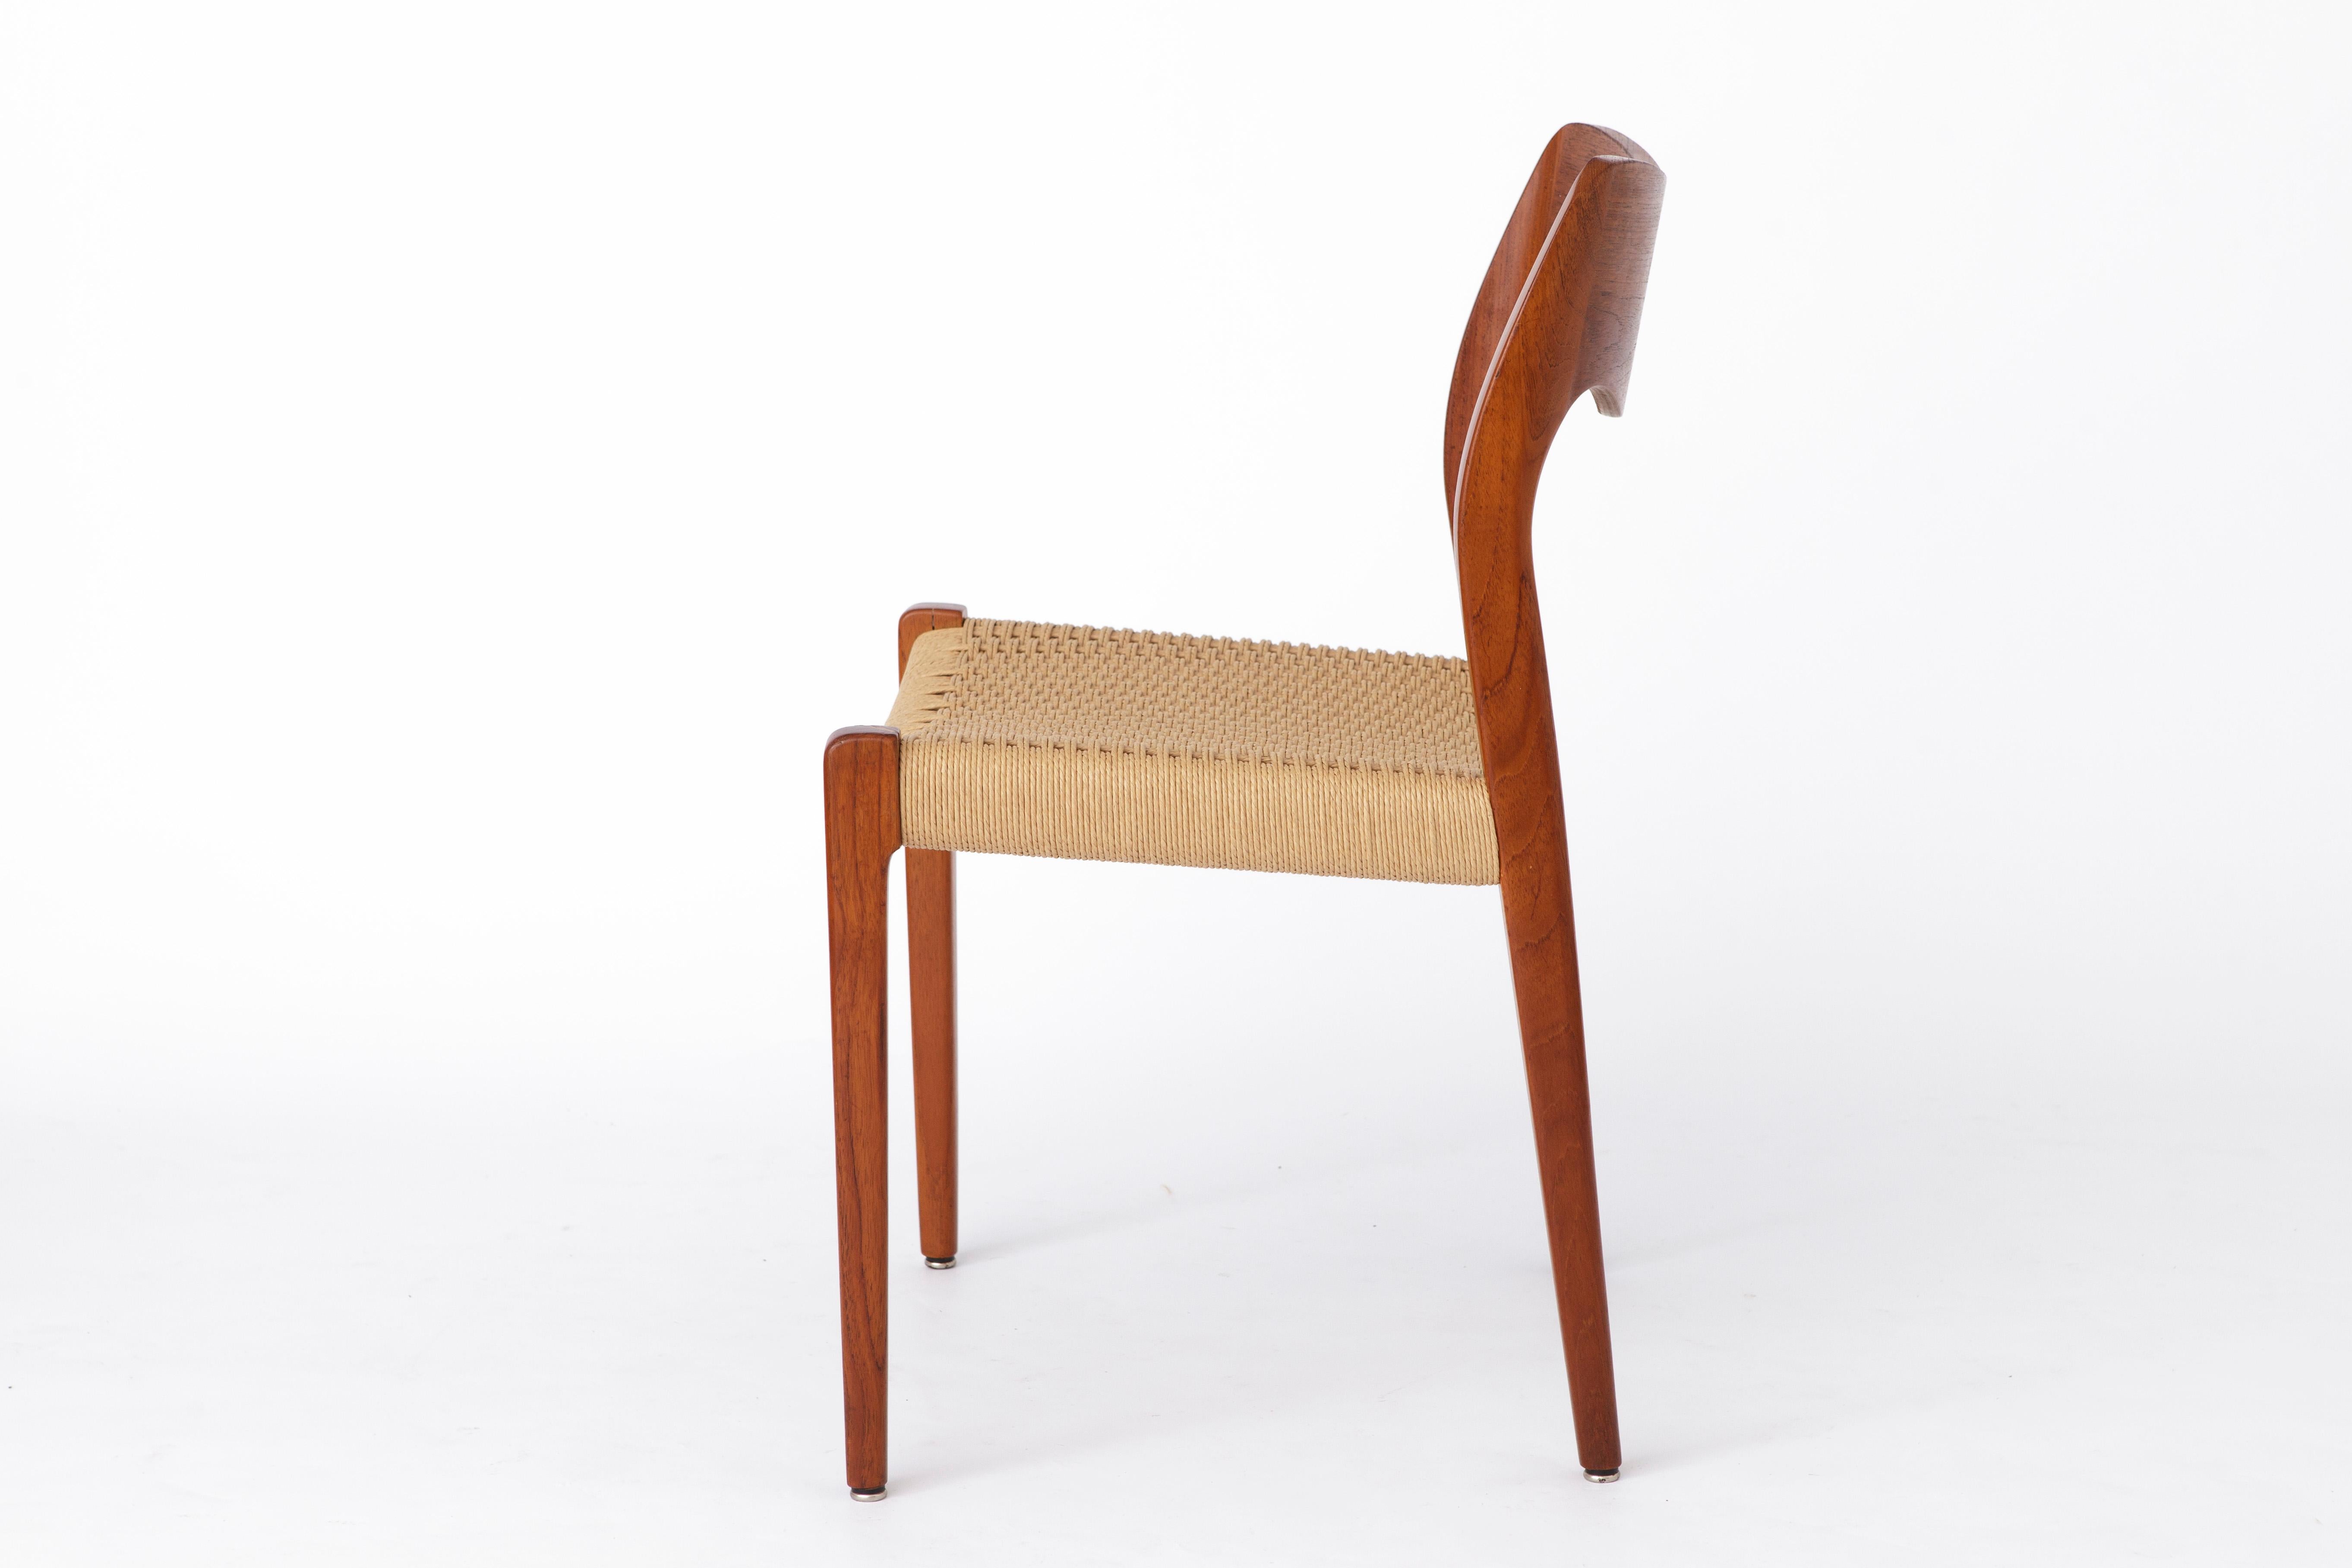 Mid-20th Century Niels Moller Chair, Model 71, 1950s Vintage Teak - Repaired For Sale